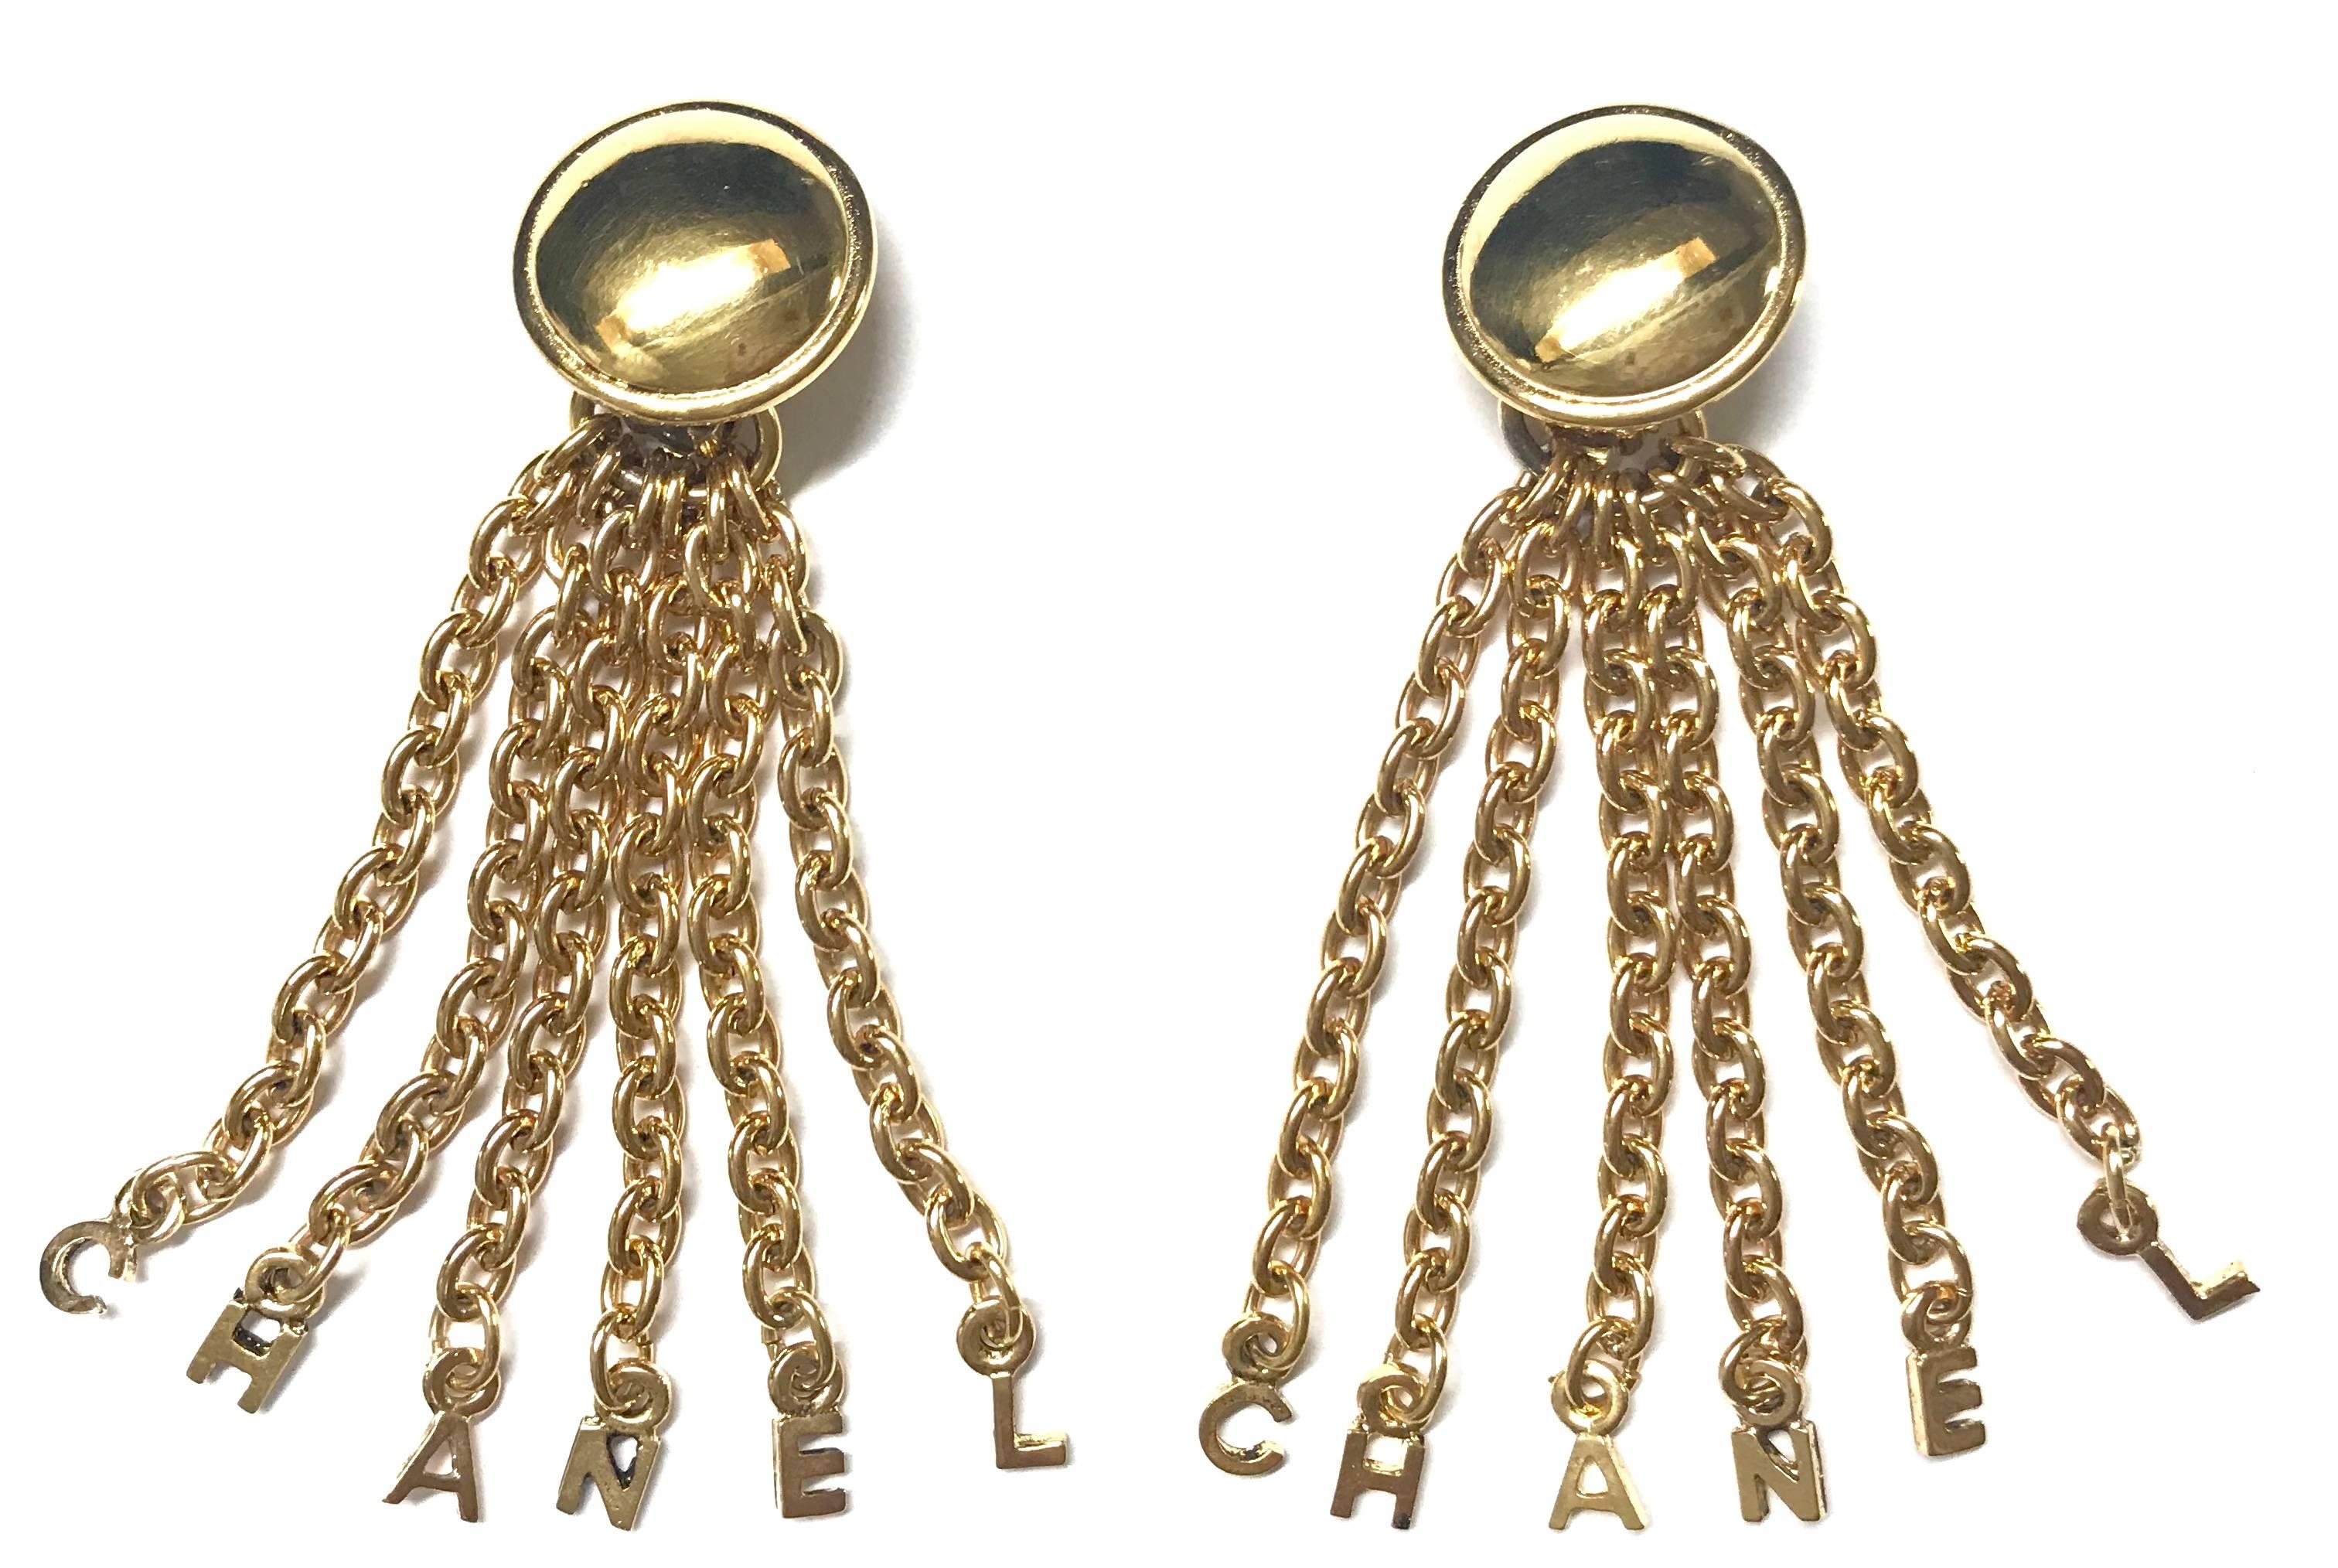 1980-1990s. Vintage CHANEL golden round motif and logo letter dangling earrings. 
Rare and adorable jewelry for your collection. Can be 2 way use.

Introducing one-of-a-kind vintage CHANEL jewelry piece from late 80’s through early 90’s, the letter